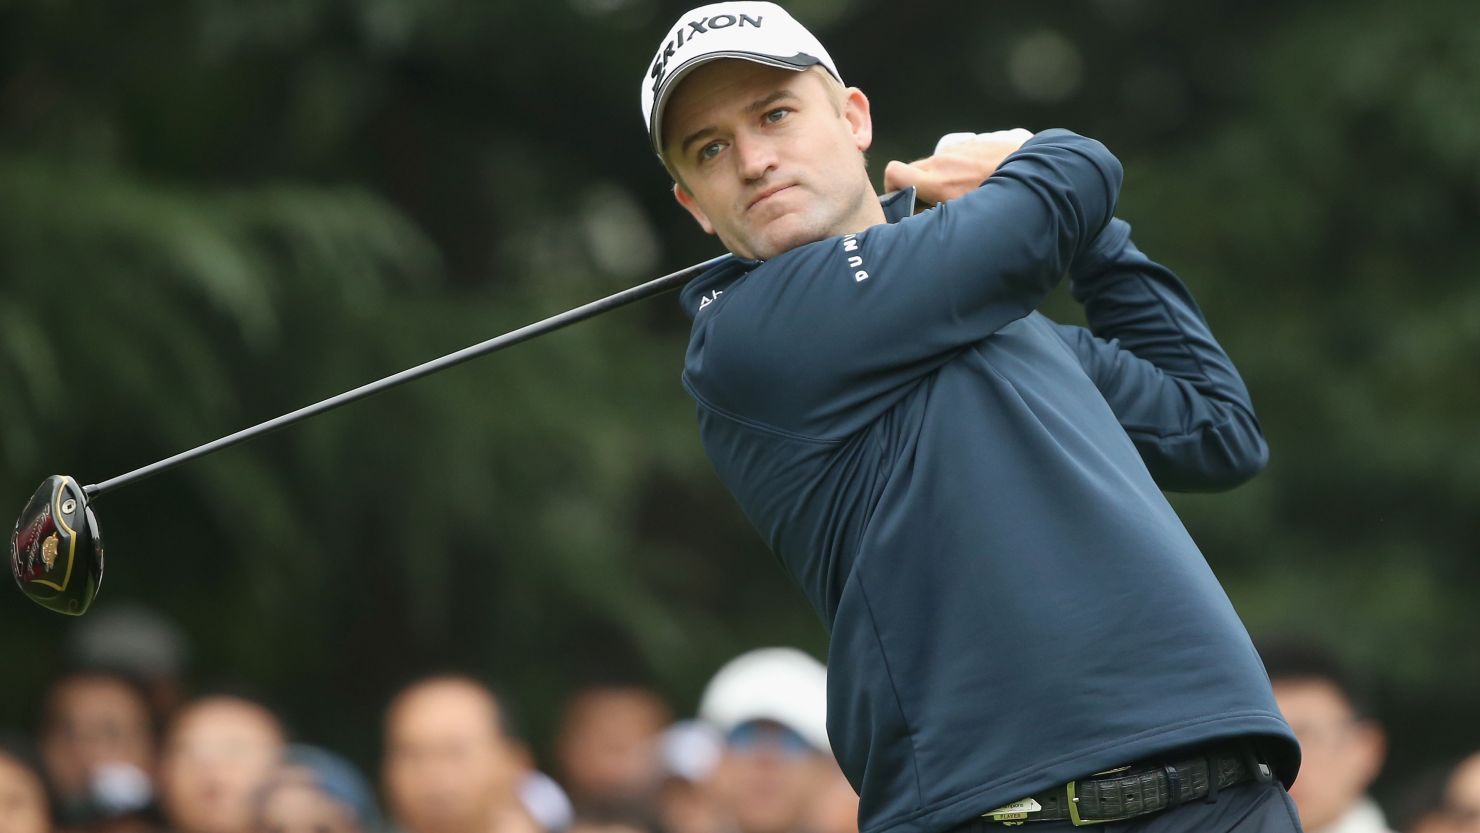 Russell Knox of Scotland showed steely determination to win his first major tournament with a closing 68 in China.